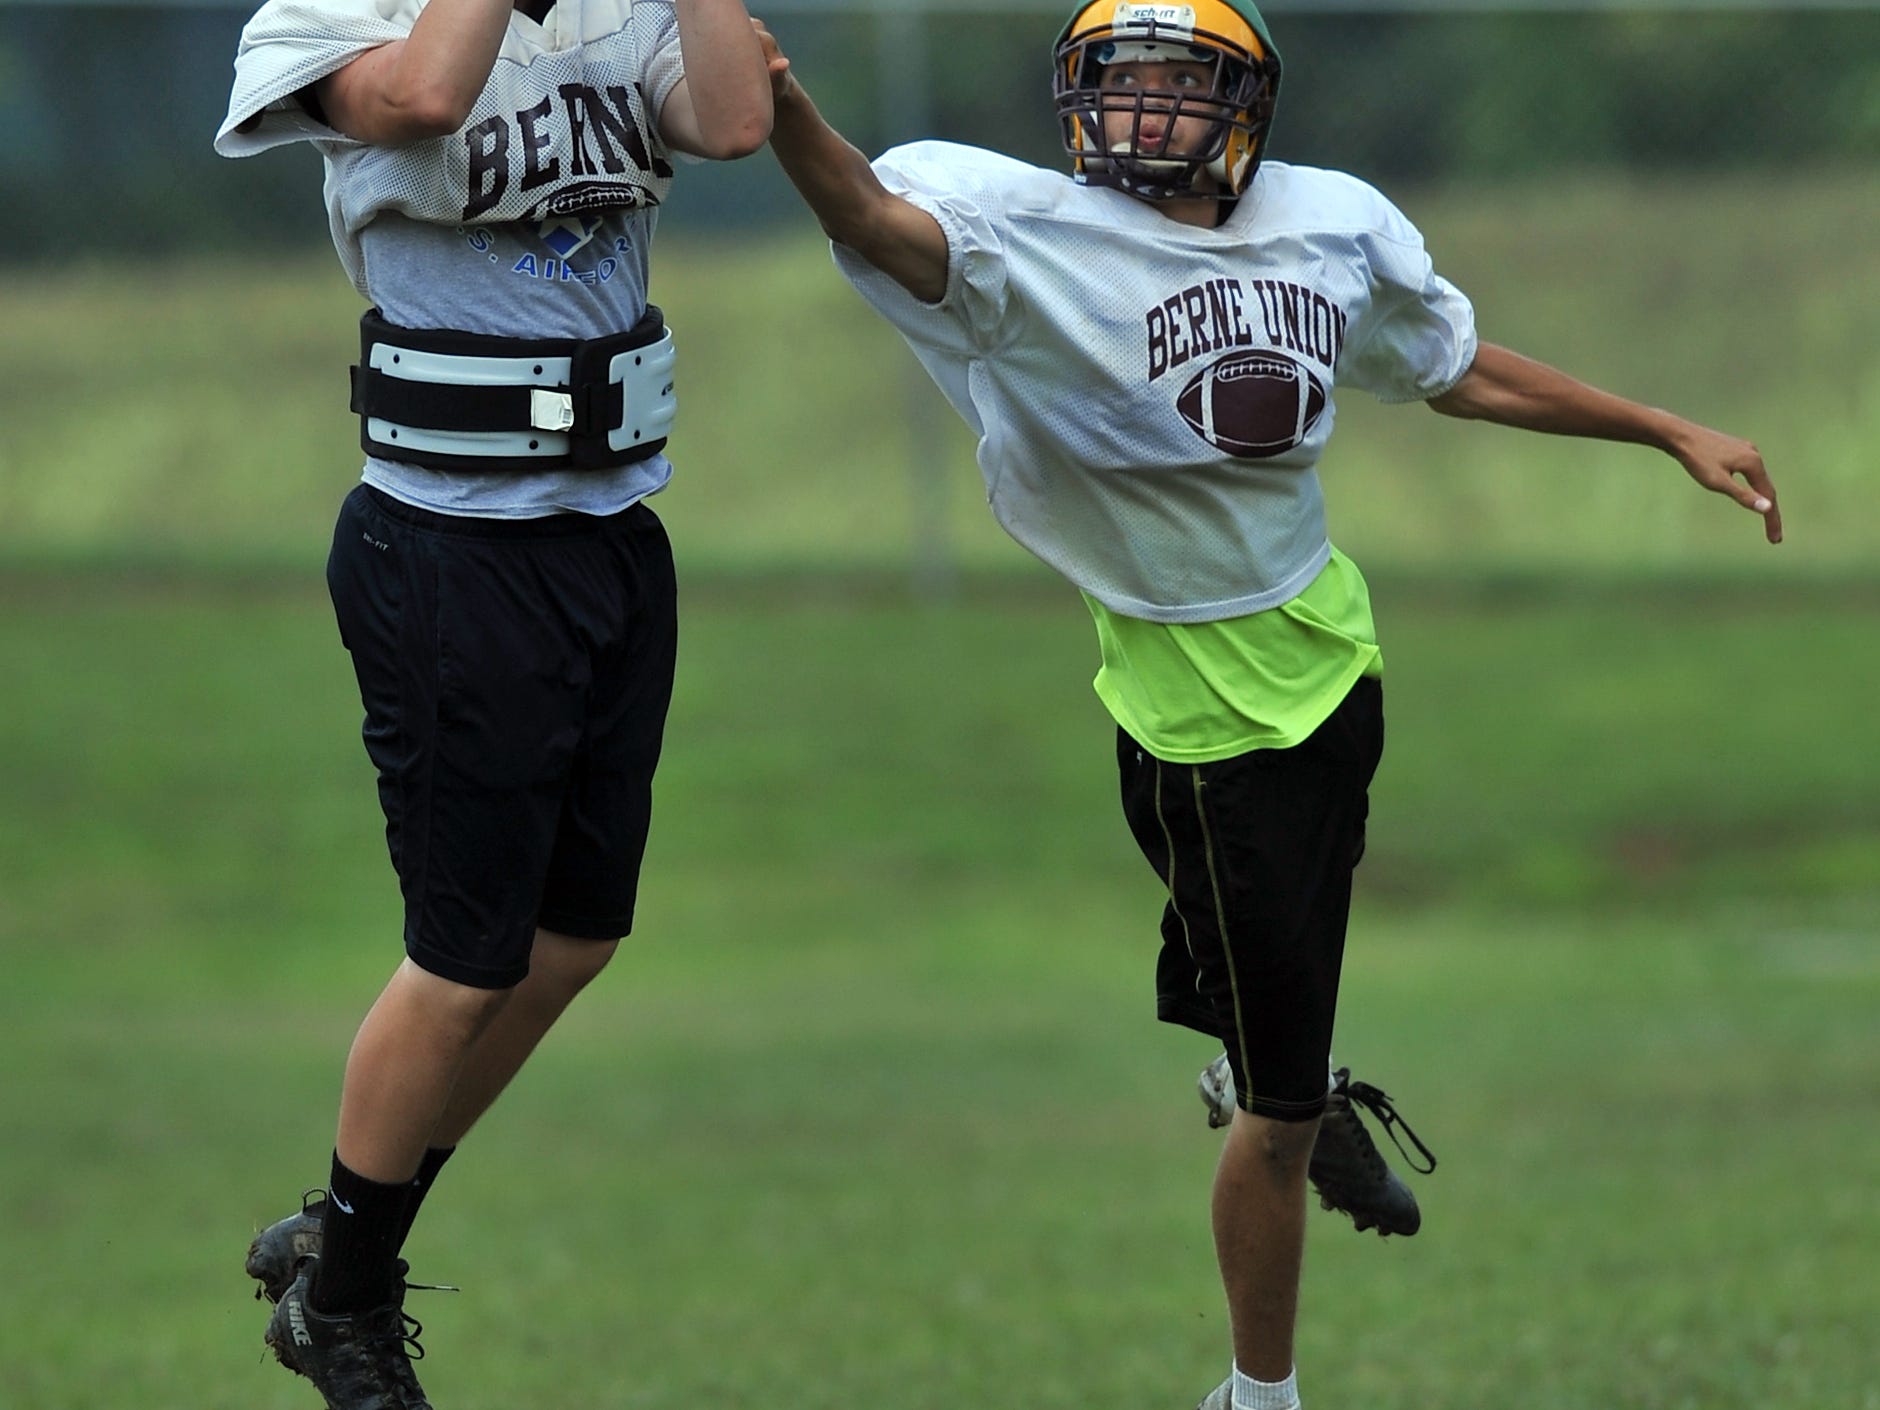  Hanson Holter, left, picks off a pass intended for Peter Redman Aug. 12 during a Berne Union High School football practice in Sugar Grove. 